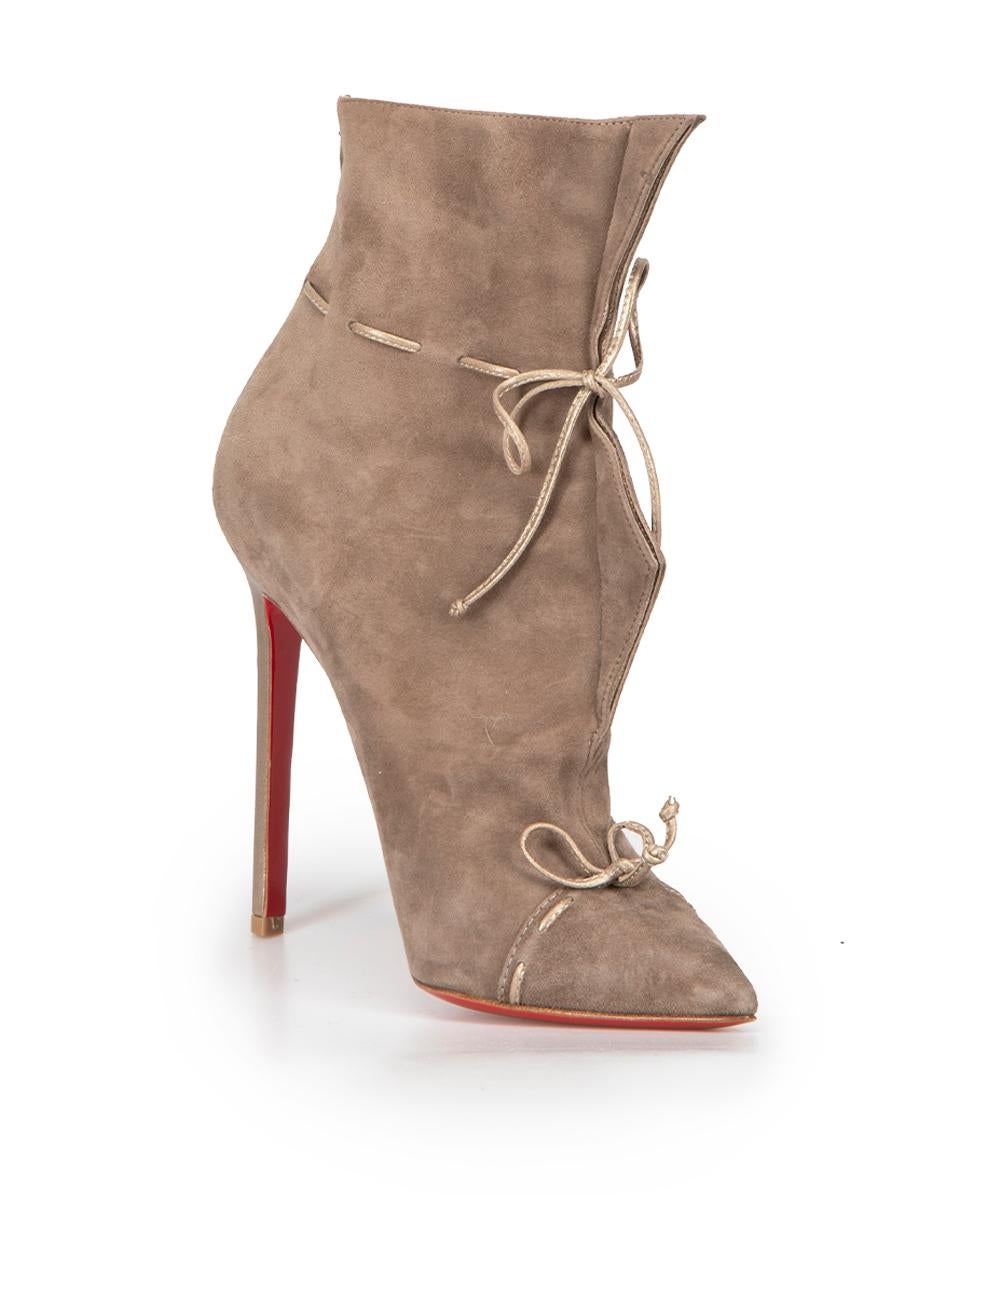 CONDITION is Very good. Minimal wear to shoes is evident. Small indent marks on bottom soles is evident on this used Christian Louboutin designer resale item. These shoes come with original box and dust bag.



Details


Taupe

Suede

Ankle